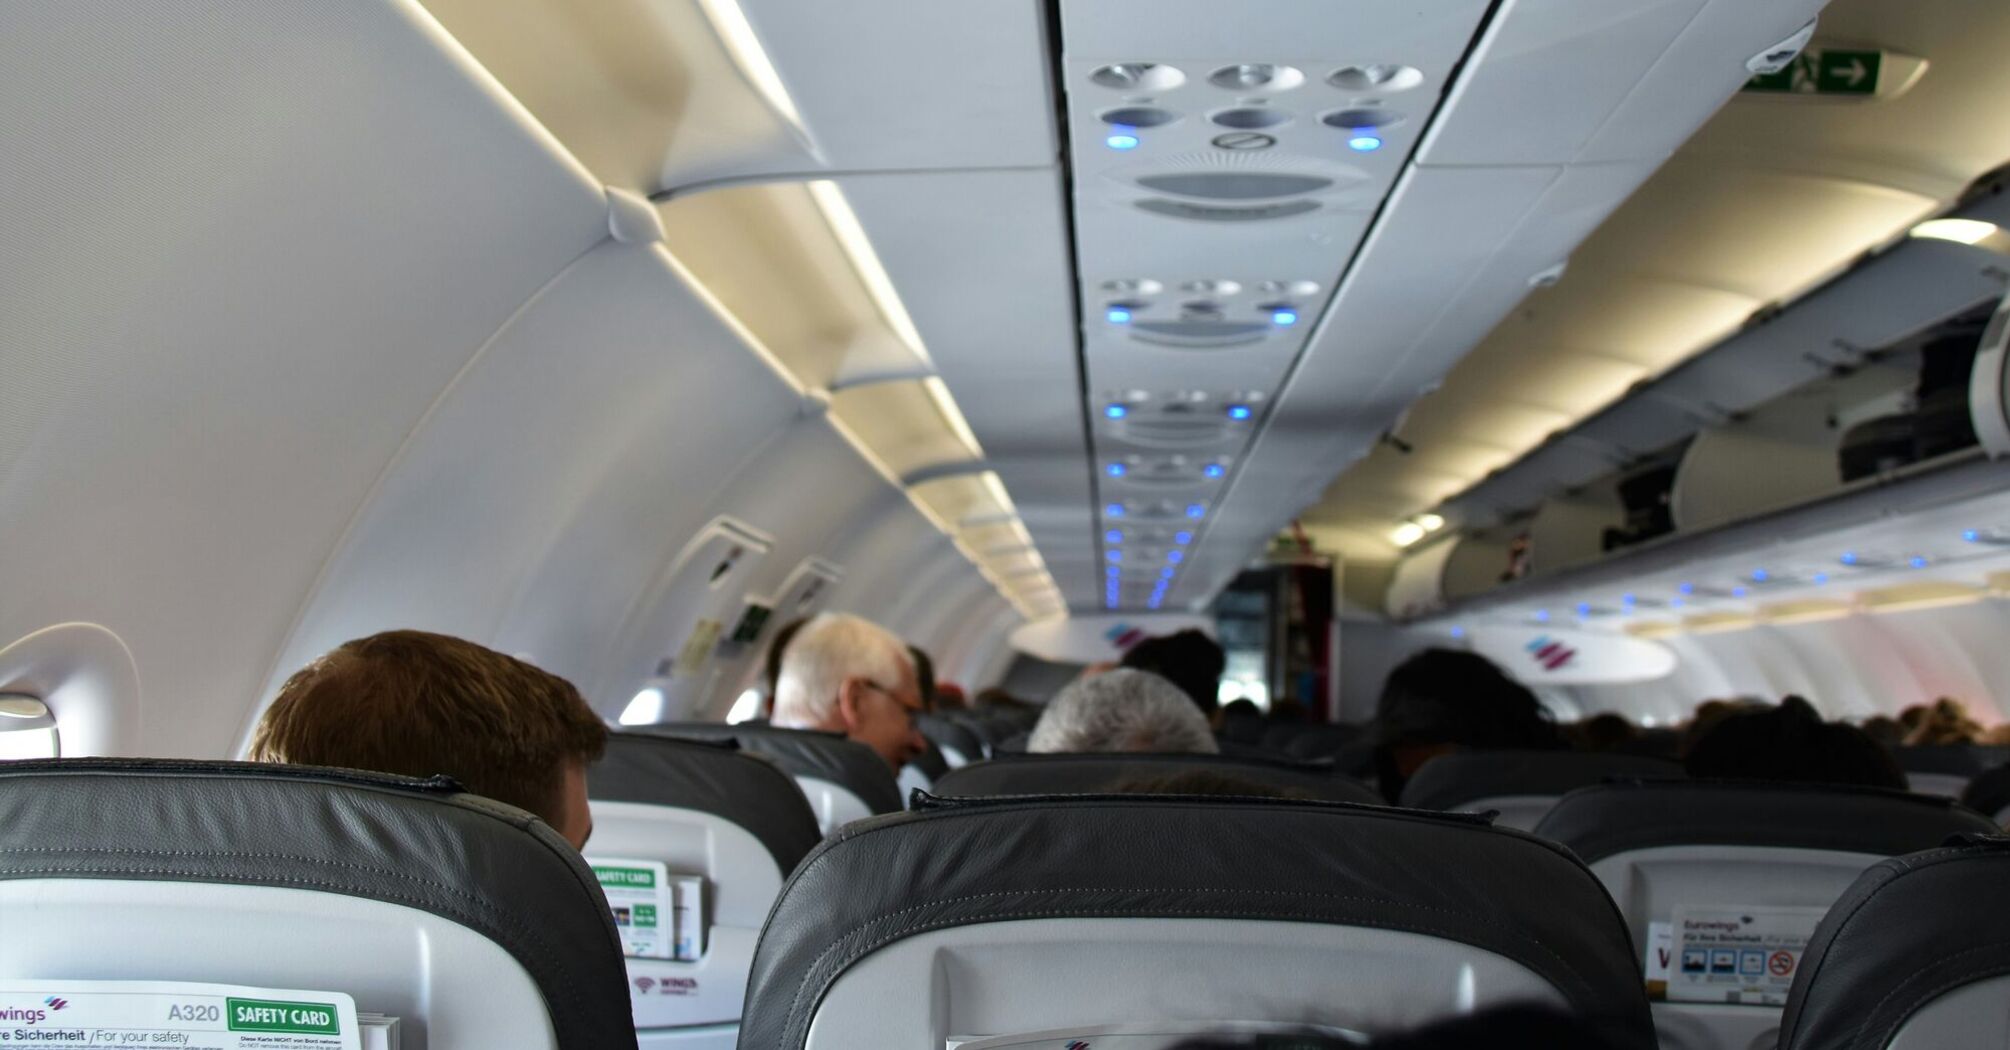 An airplane cabin interior viewed from the perspective of a passenger, showing the backs of seats, overhead compartments, and ceiling with air vents and lights